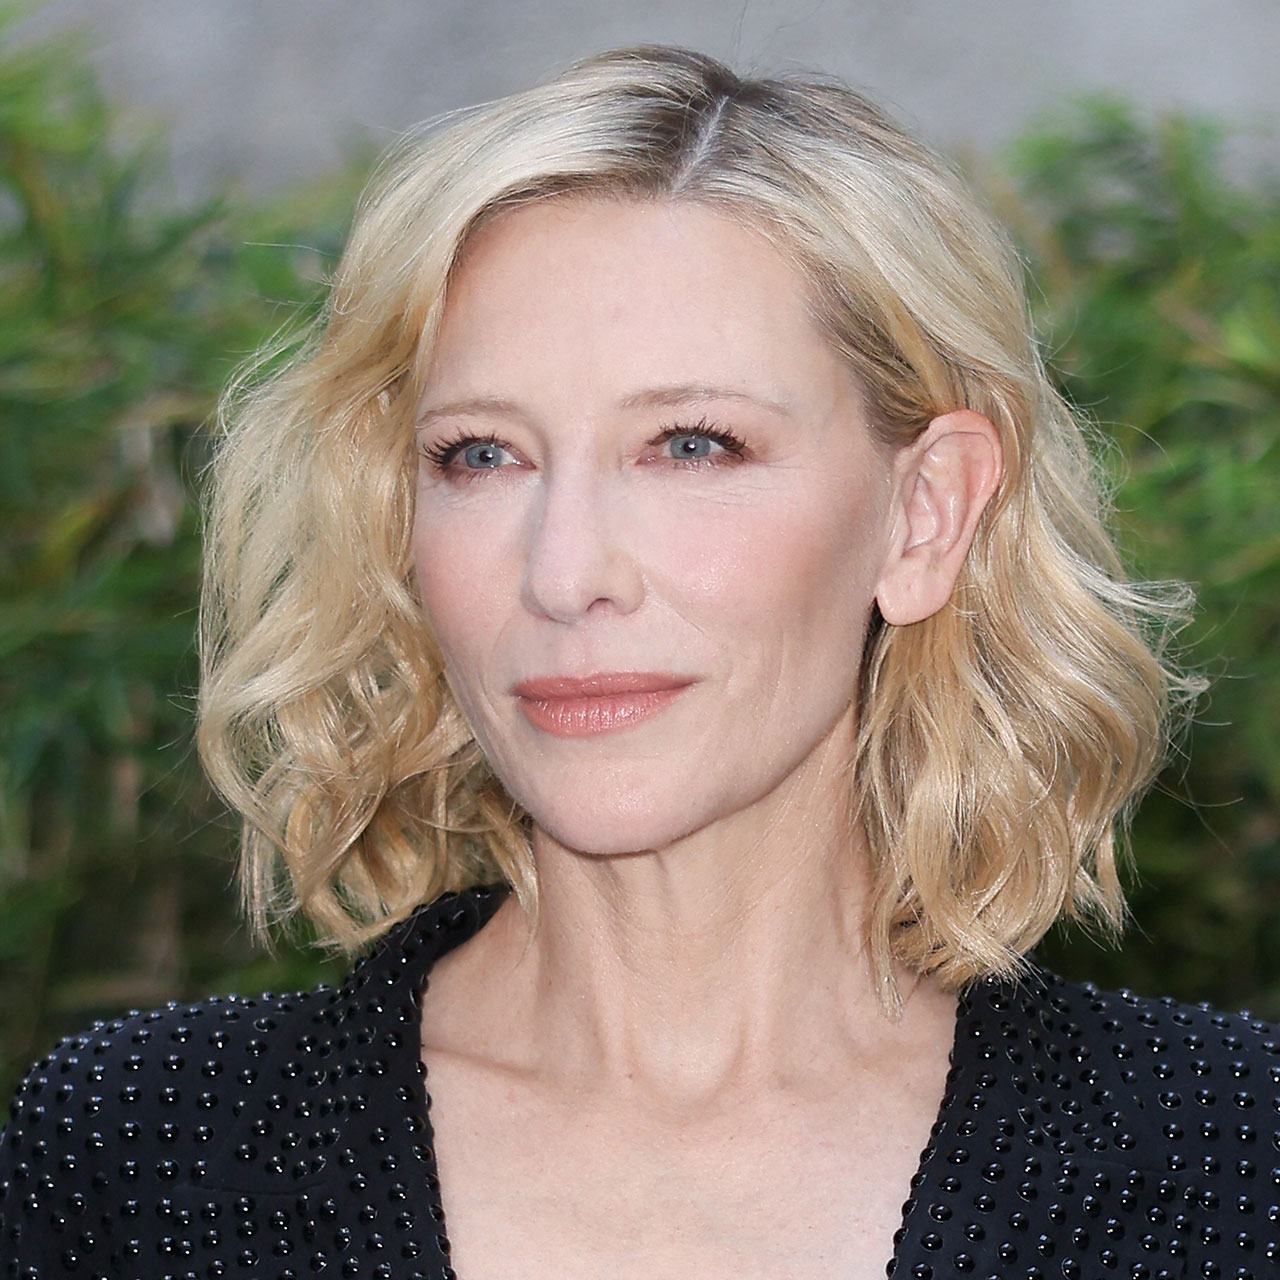 Cate Blanchett Goes Undercover With Unexpected Hair Makeover